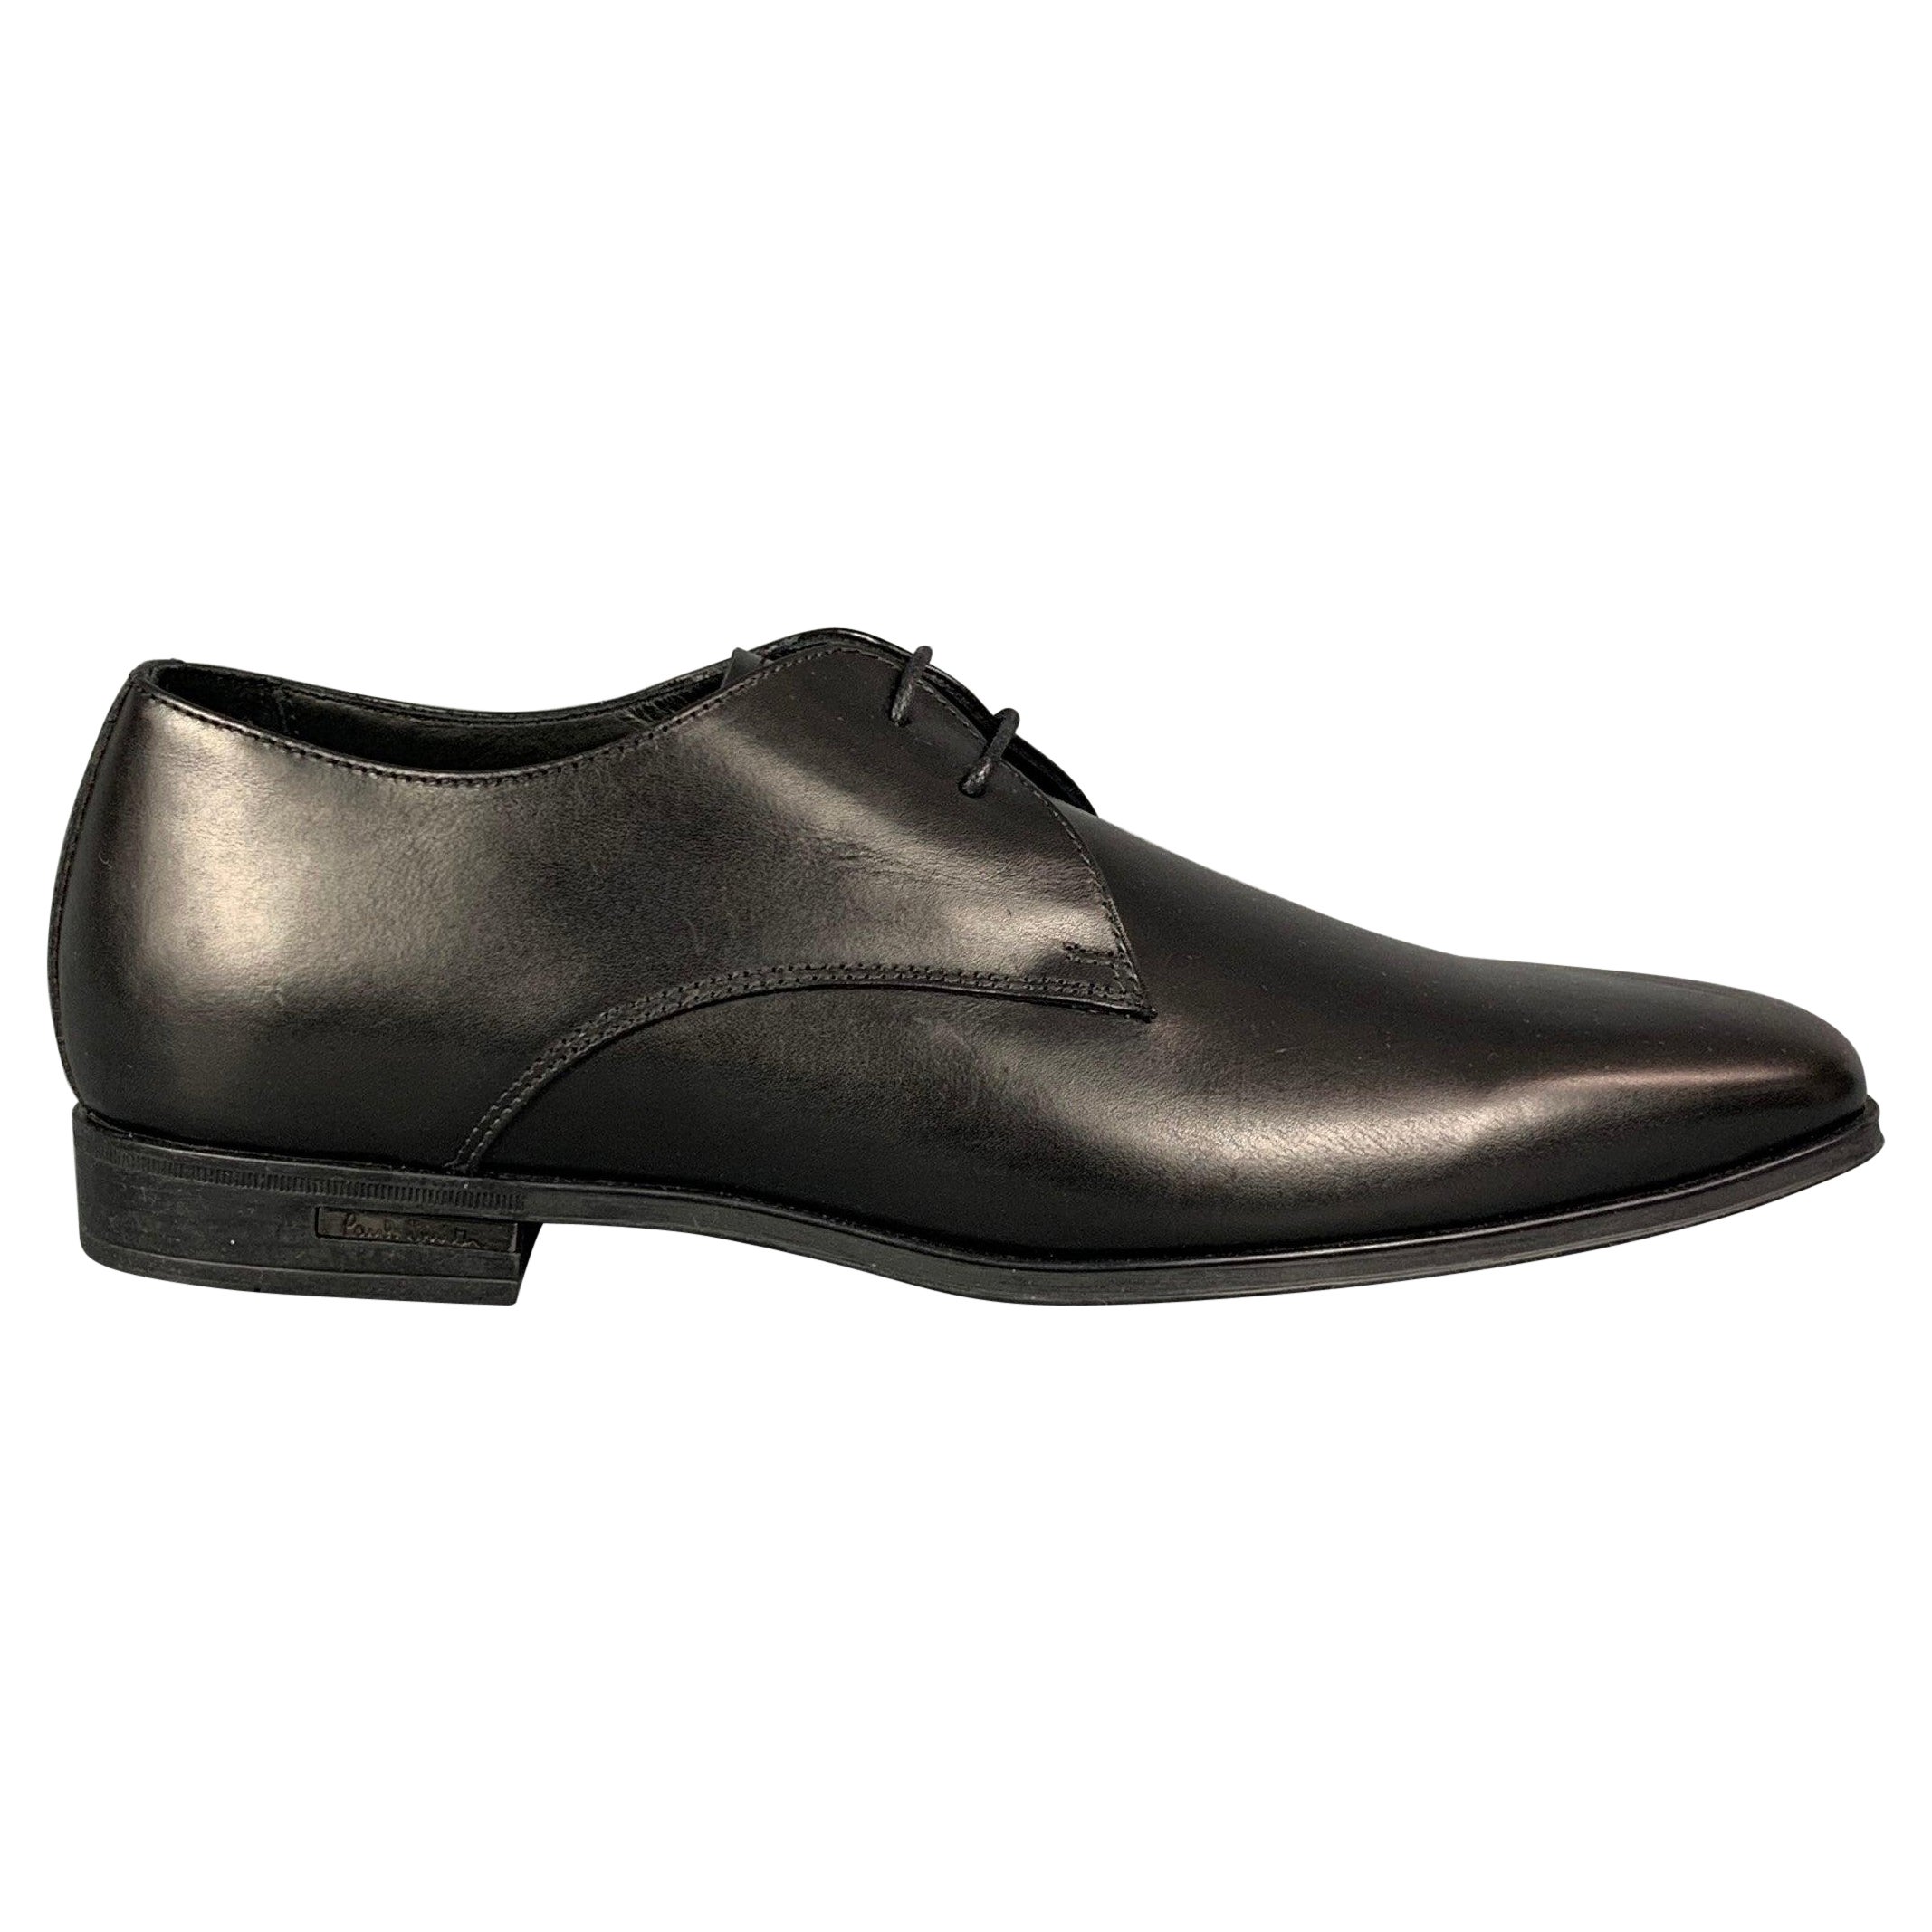 PAUL SMITH Size 7 Black Leather Lace Up Shoes For Sale